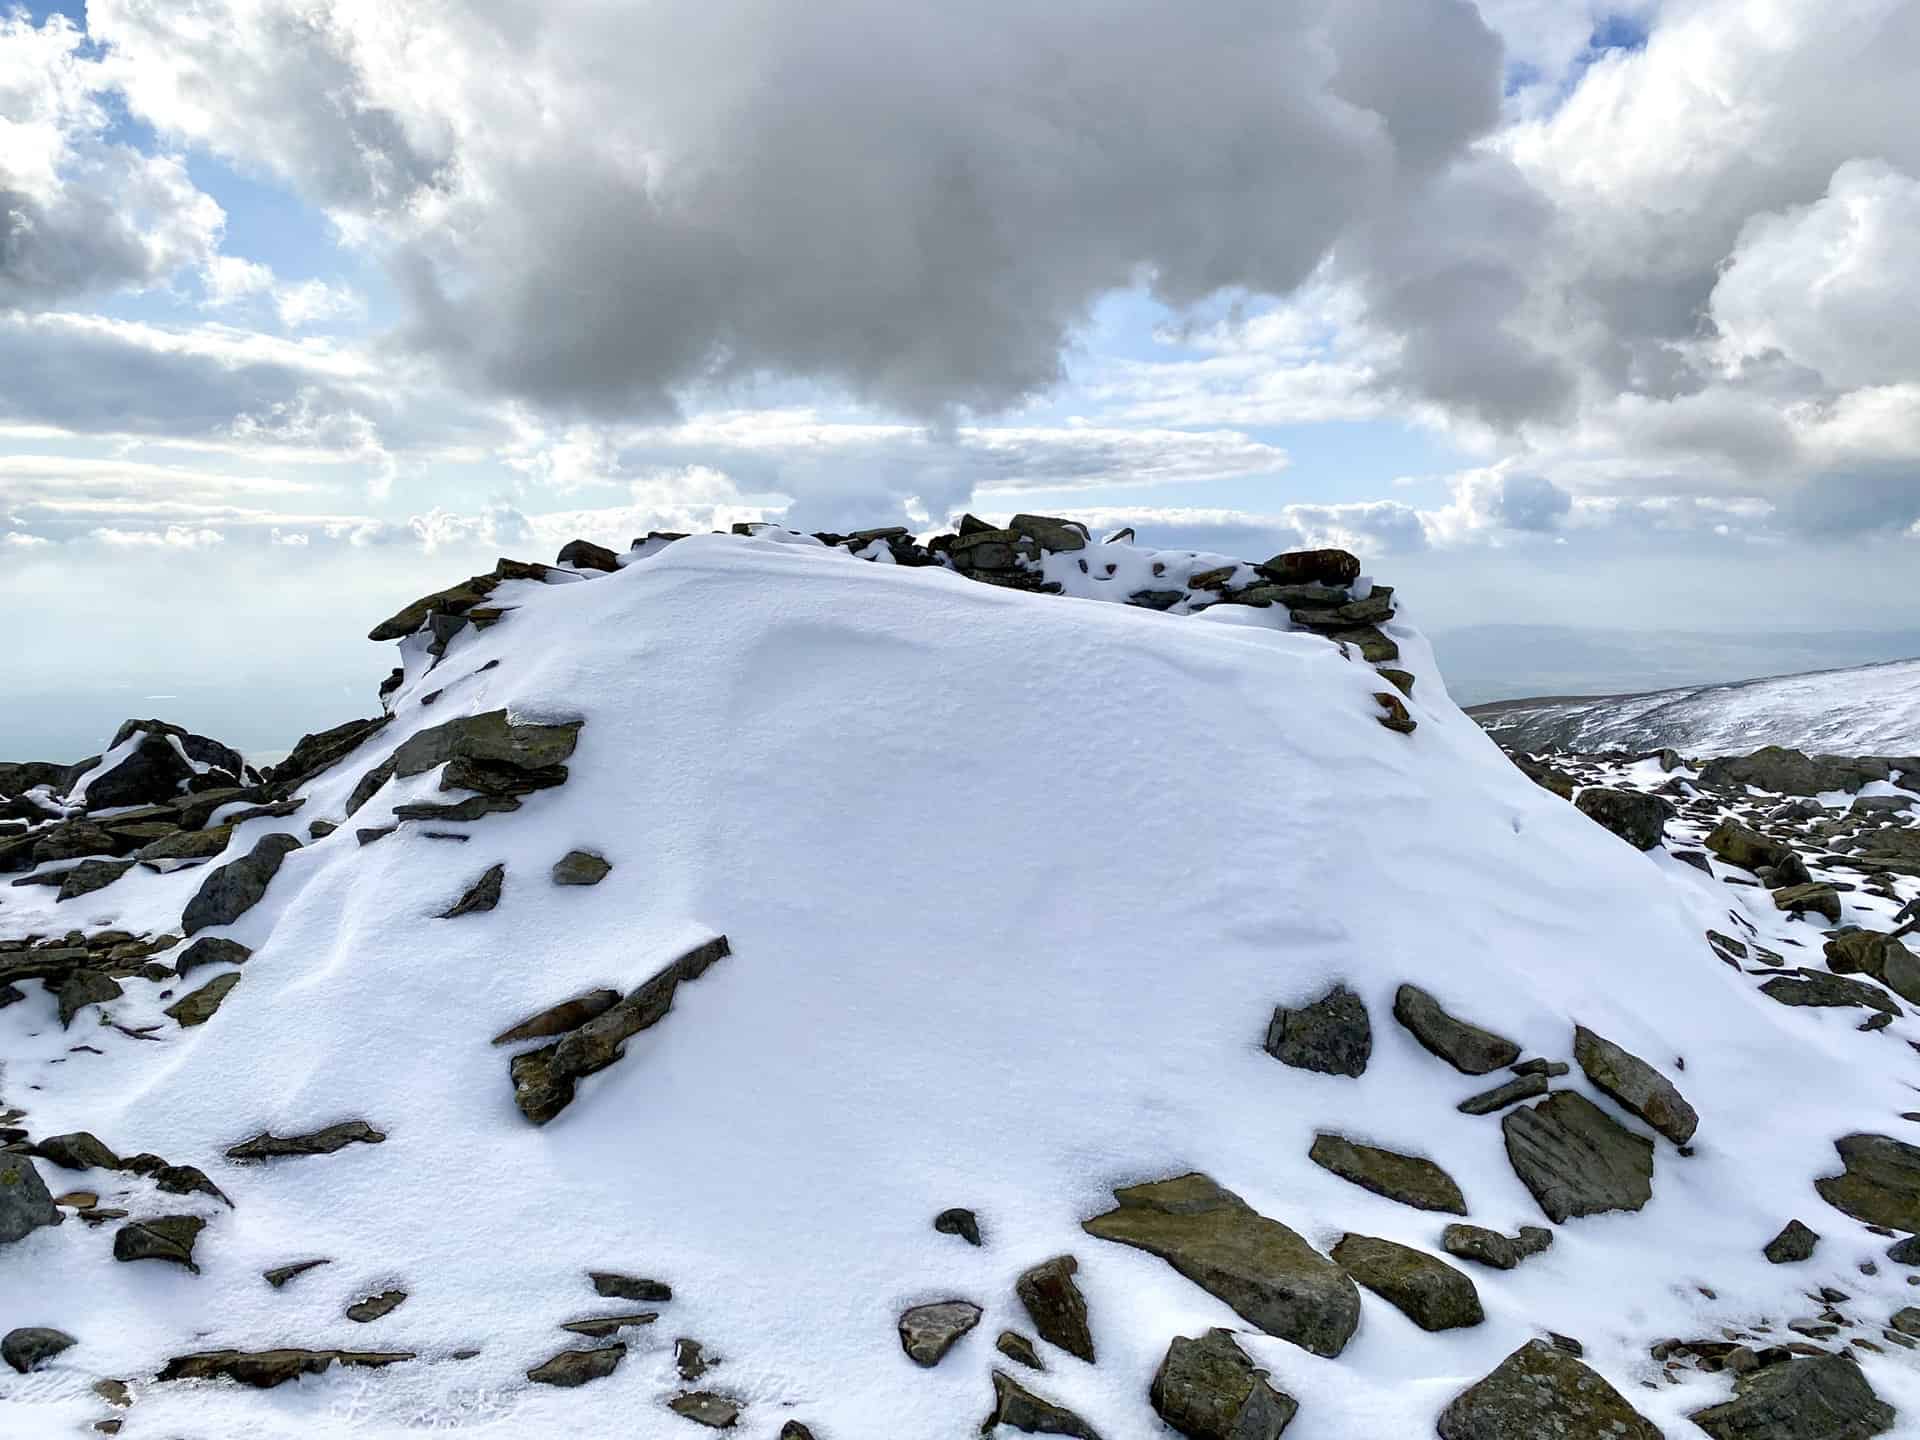 Shelter on the summit of Little Dun Fell filled with snow.